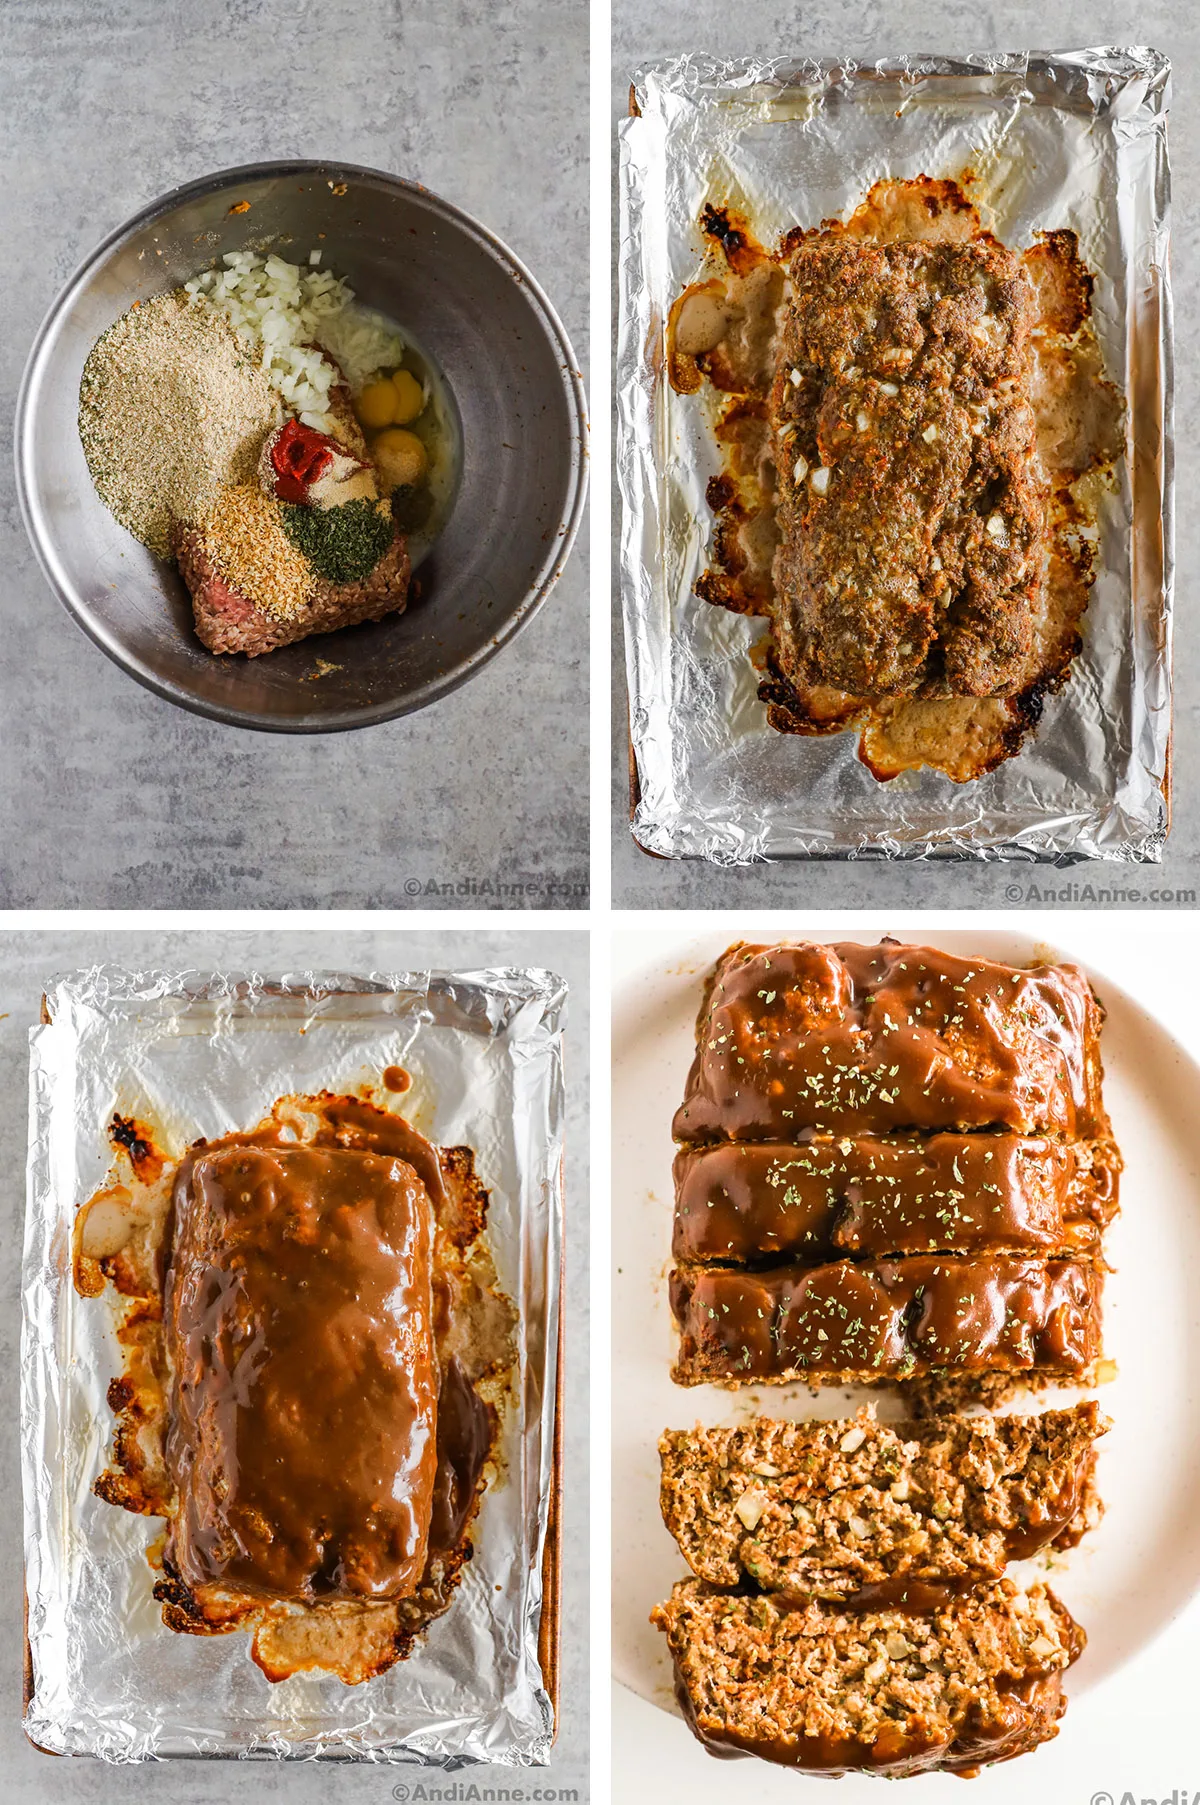 Four images showing steps to make recipe. First is meatloaf ingredients dumped in large steel bowl. Second is cooked meatloaf, third is meatloaf drizzled with gravy, fourth is sliced meatloaf with brown gravy topping.